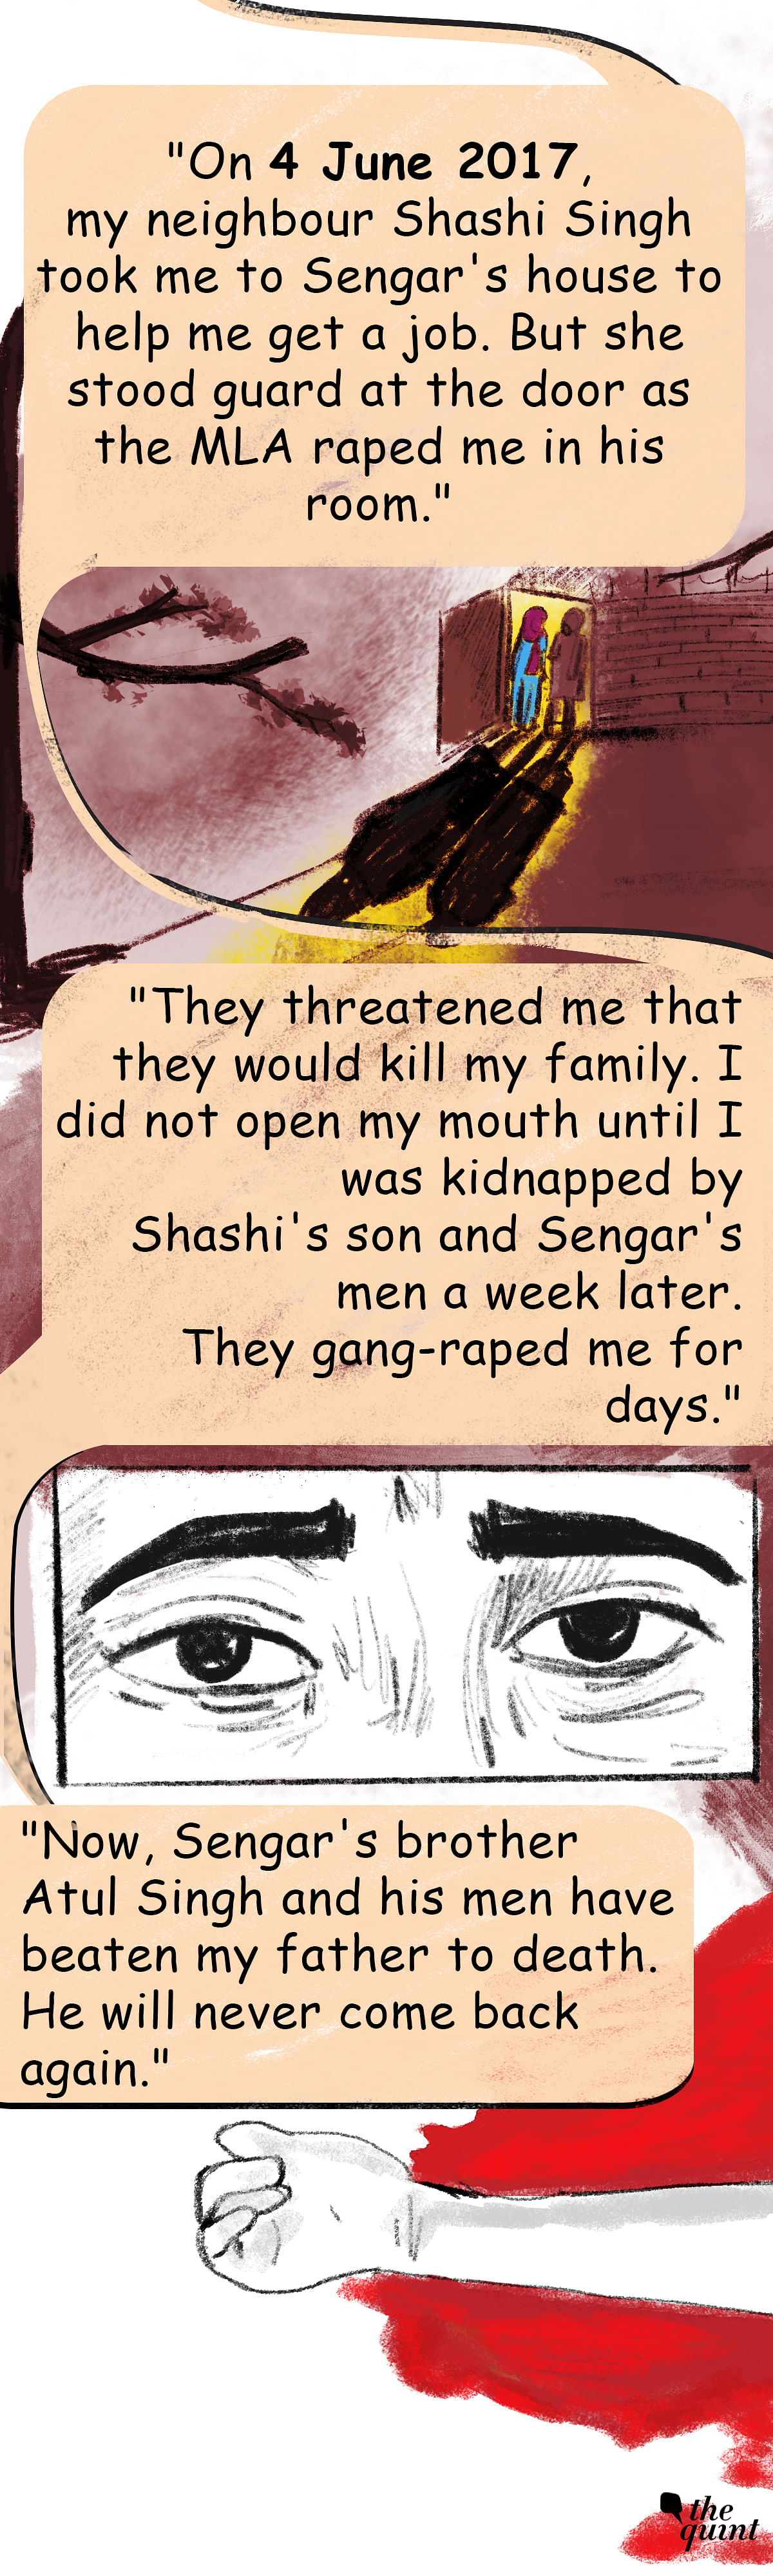 Graphic Novel: The Long Road to Justice For Unnao Rape Survivor